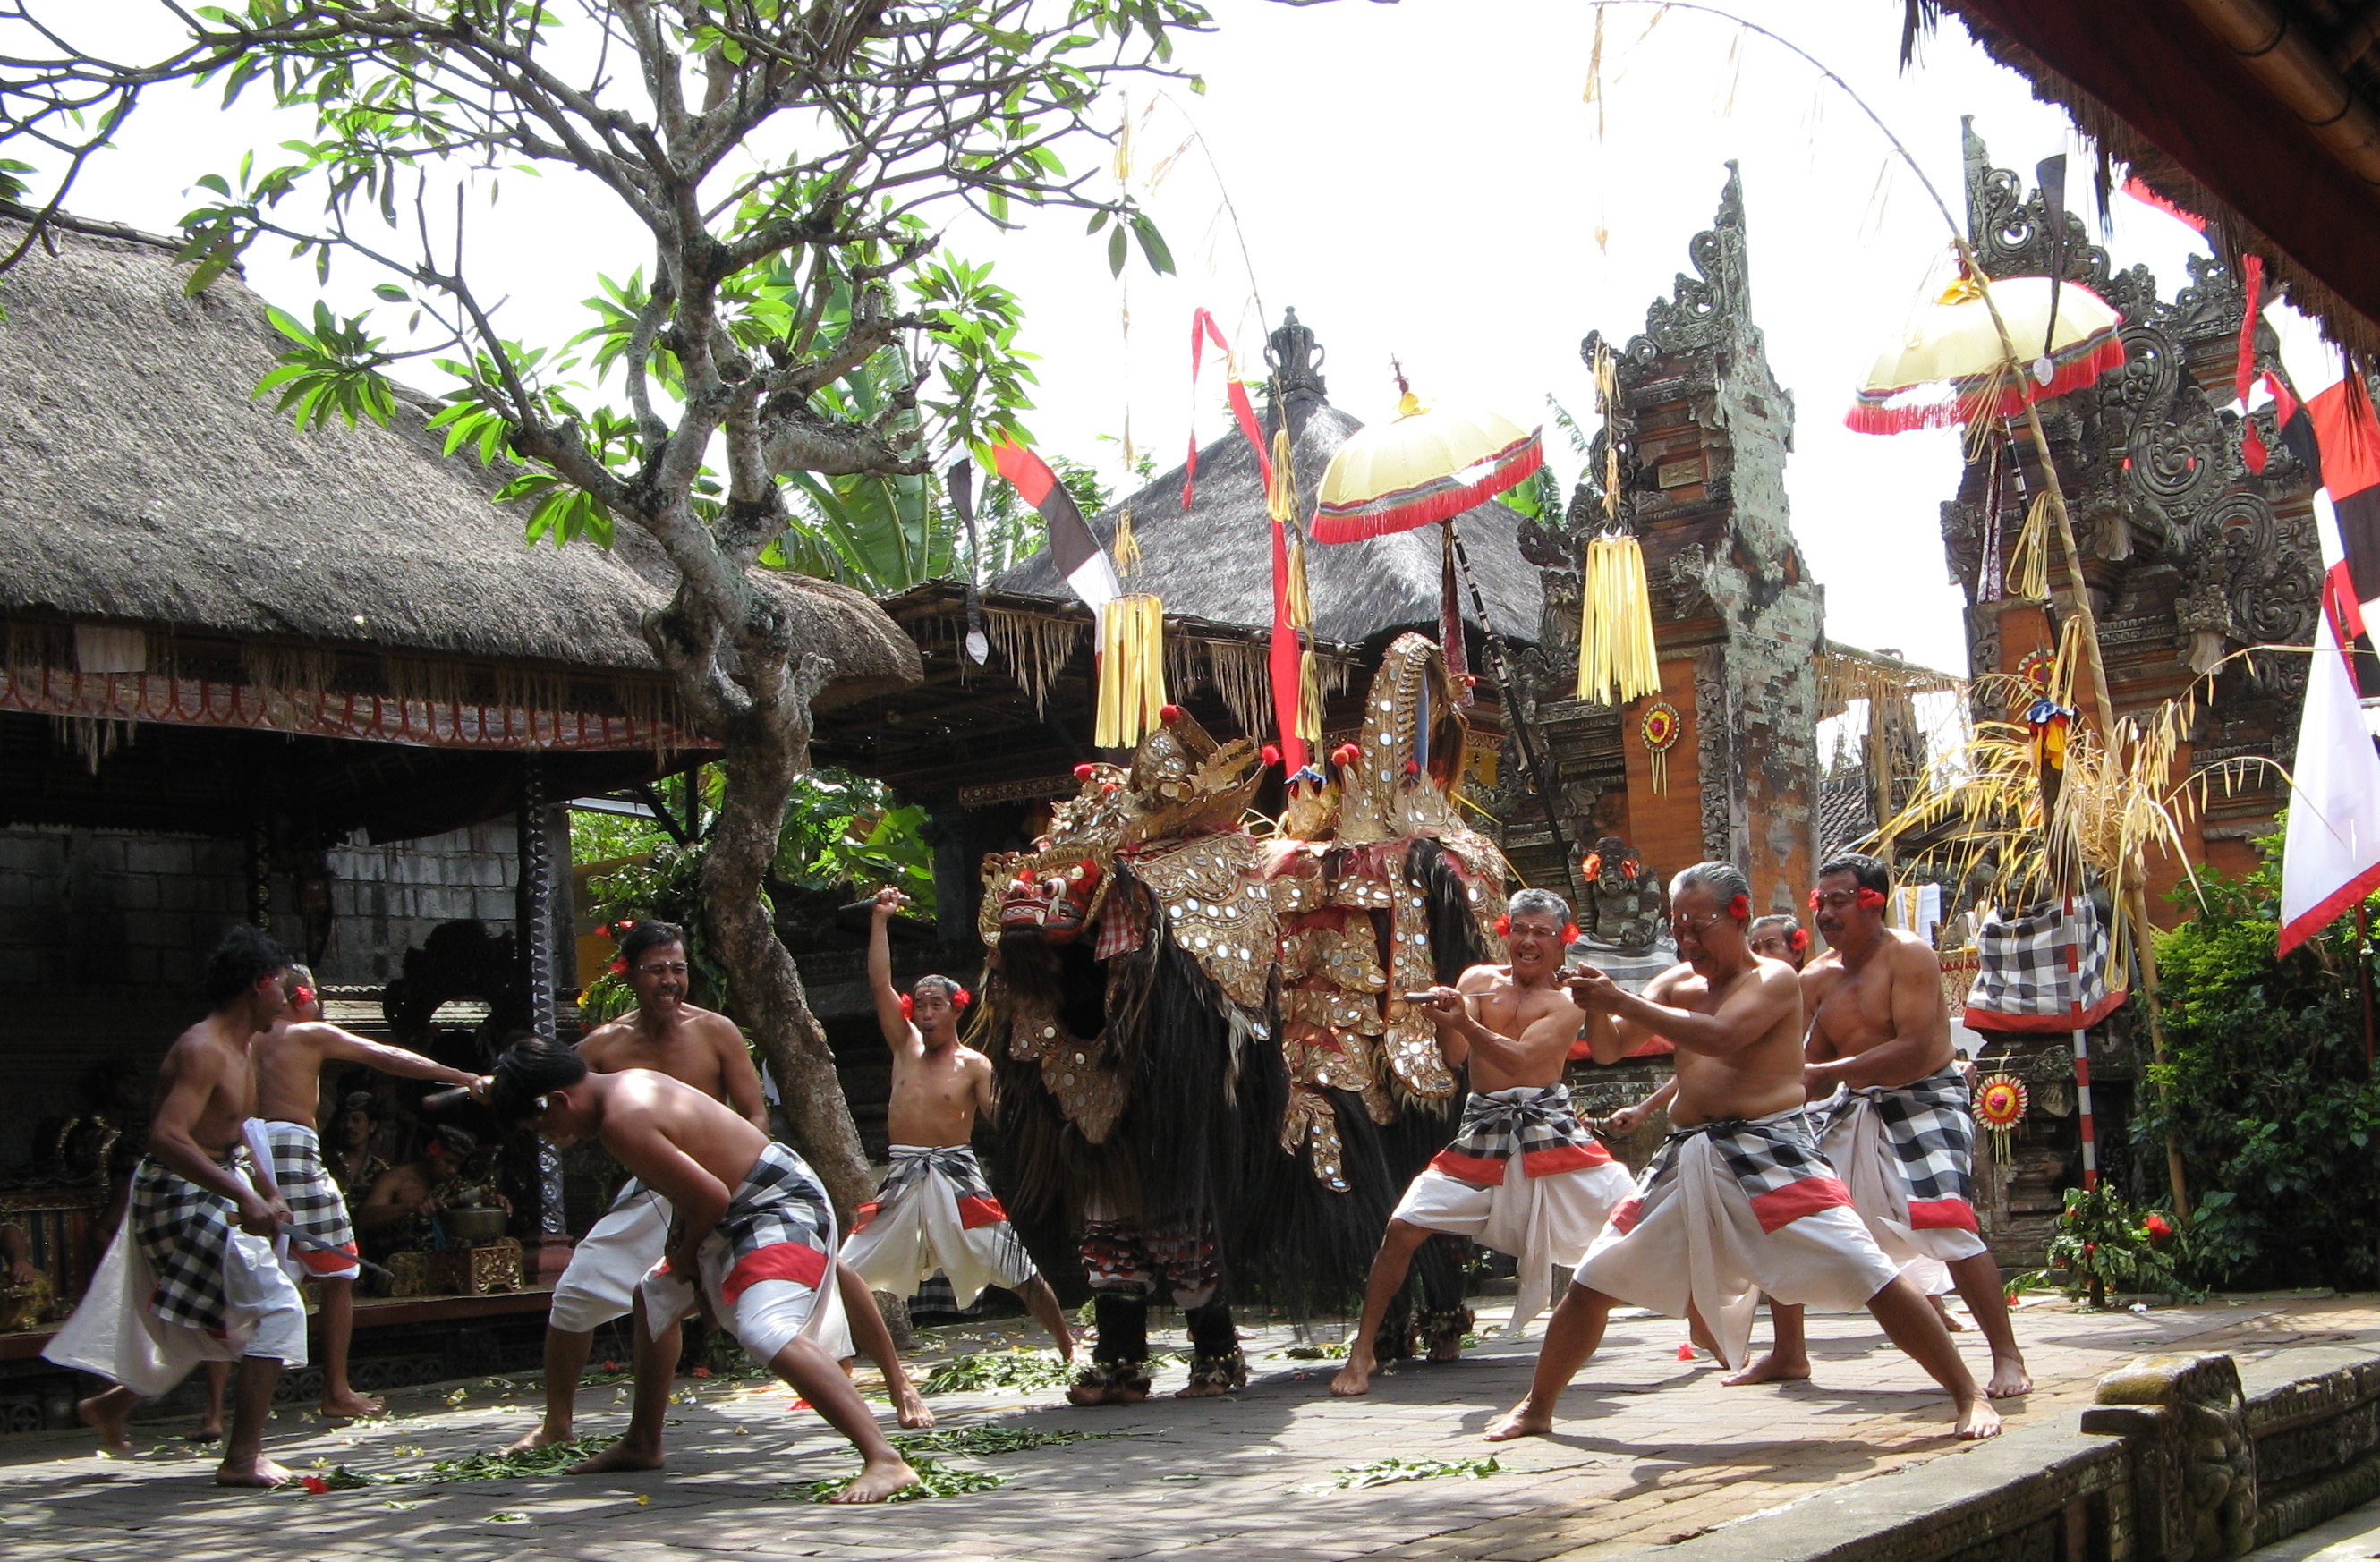 A barong dance, where Balinese men stab themselves while under trance. Photo: Wikimedia Commons